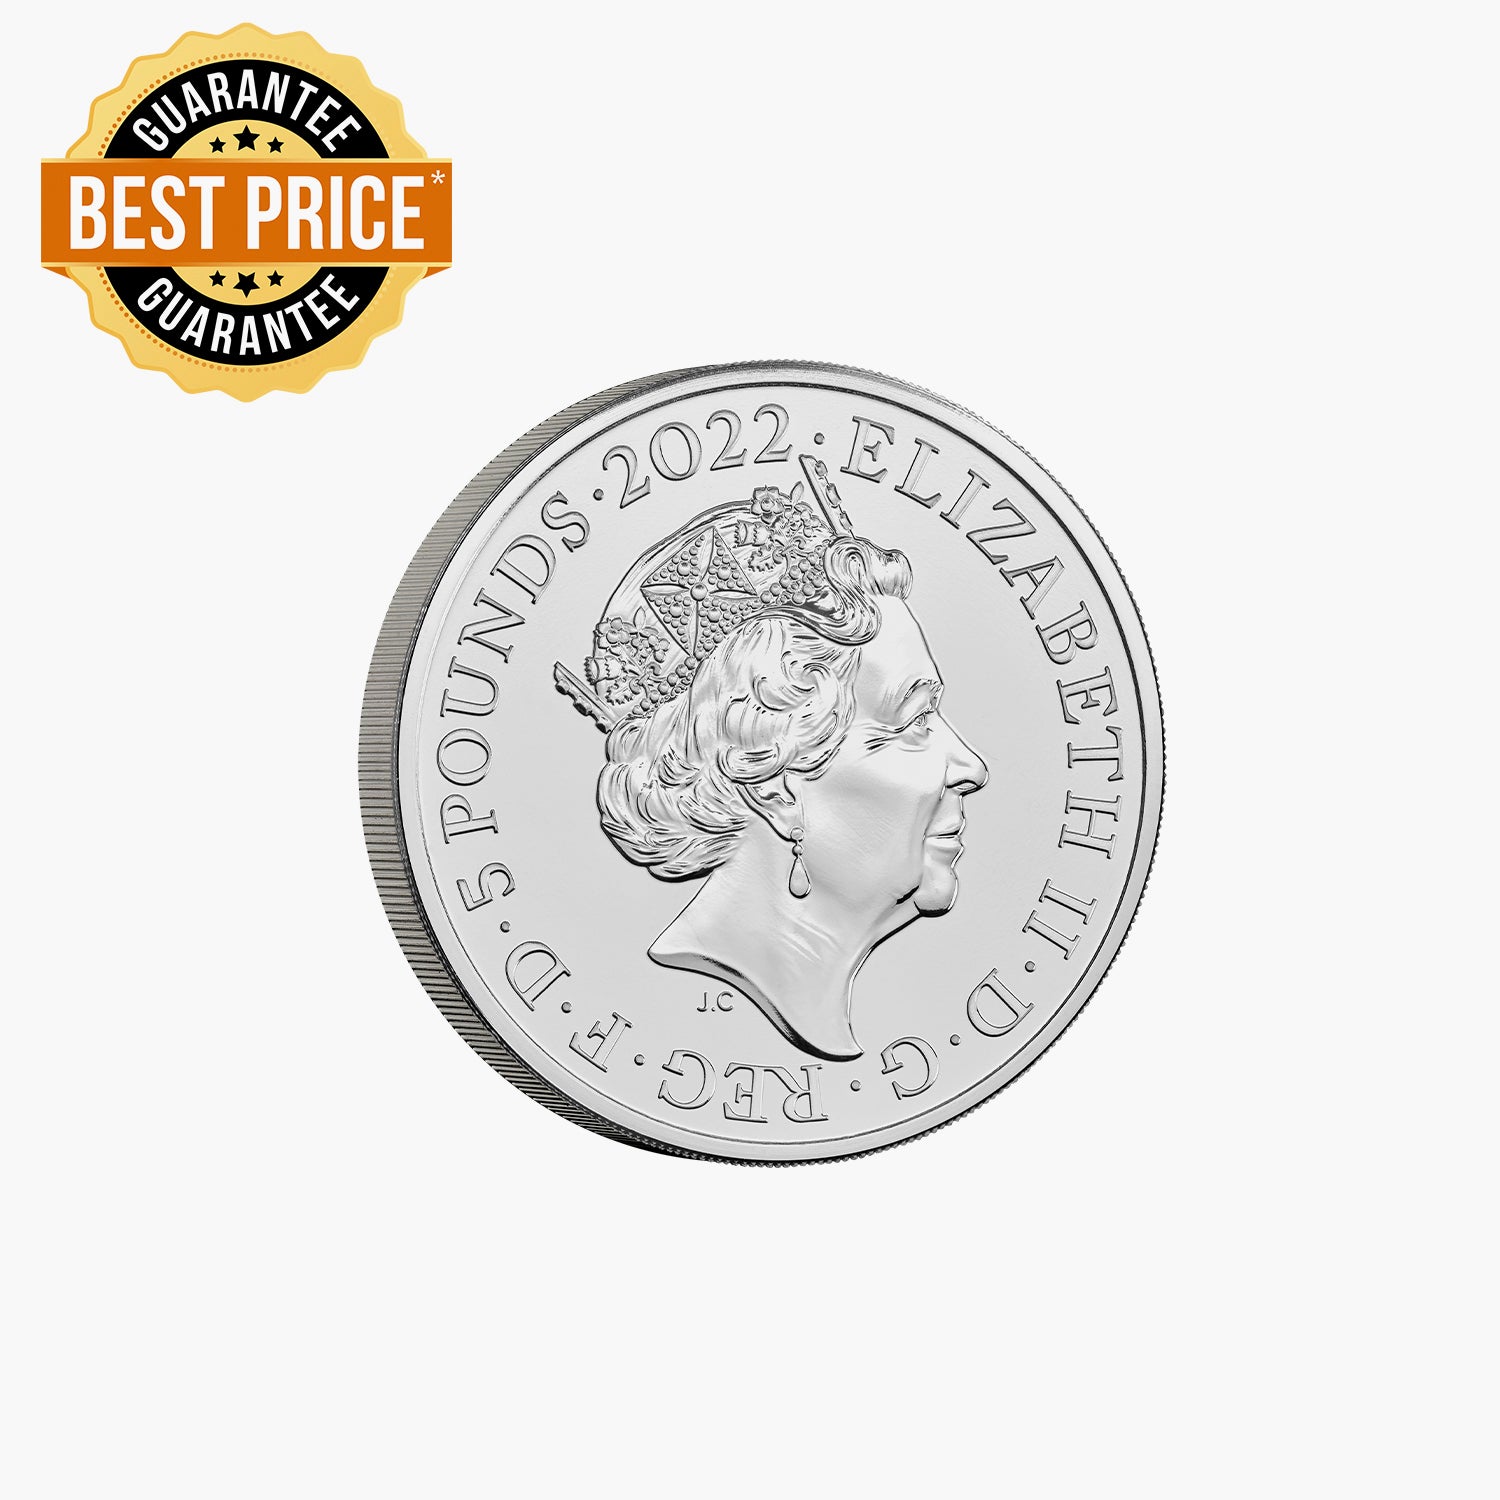 The Official Queens Reign Commonwealth 2022 UK £5 BU Coin